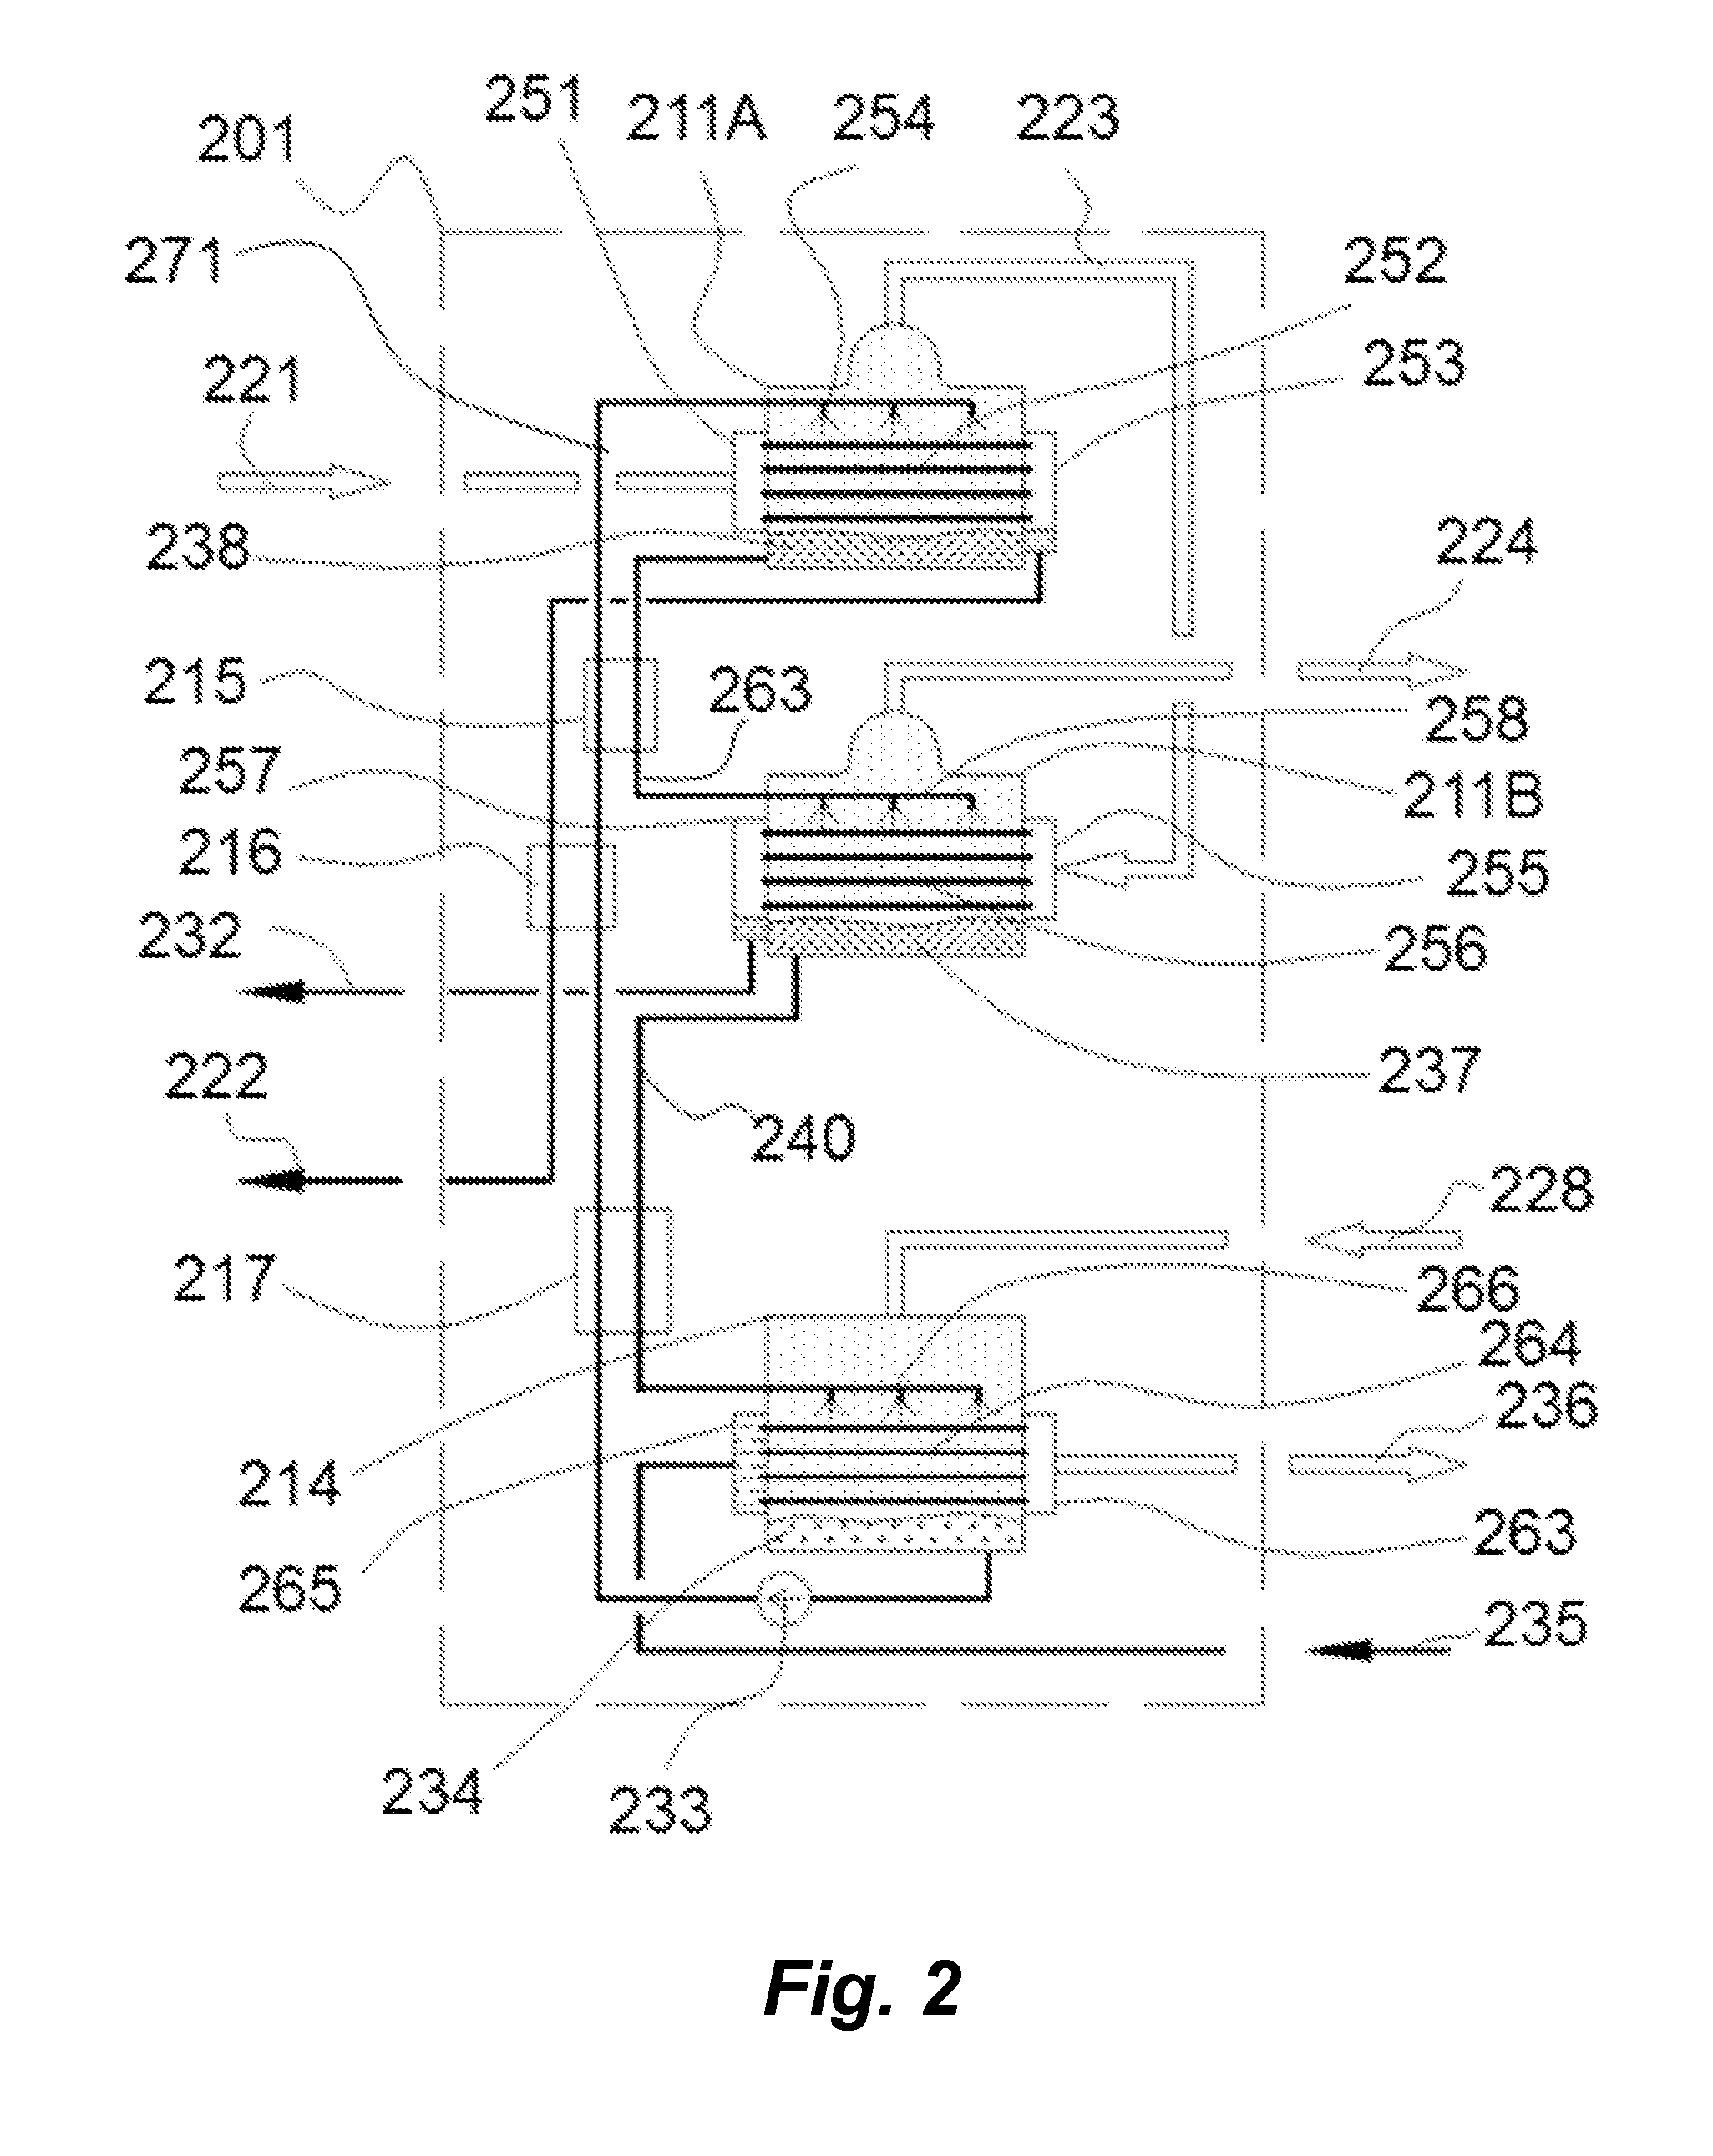 Apparatus and method for vapor driven absorption heat pumps and absorption heat transformer with applications